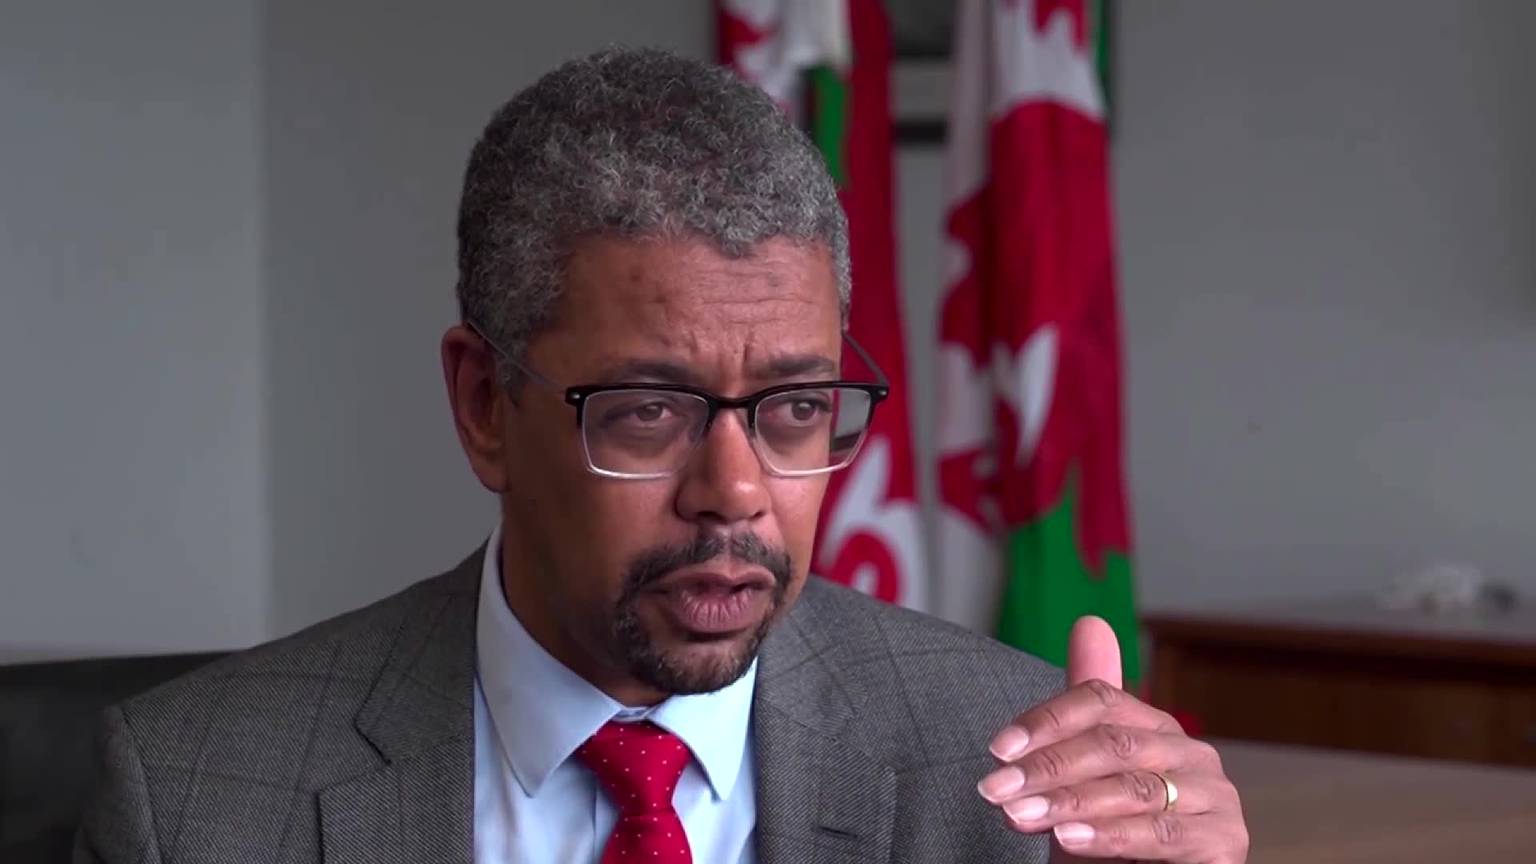 Video: Wales’ first Black leader starts term amid divisions [Video]